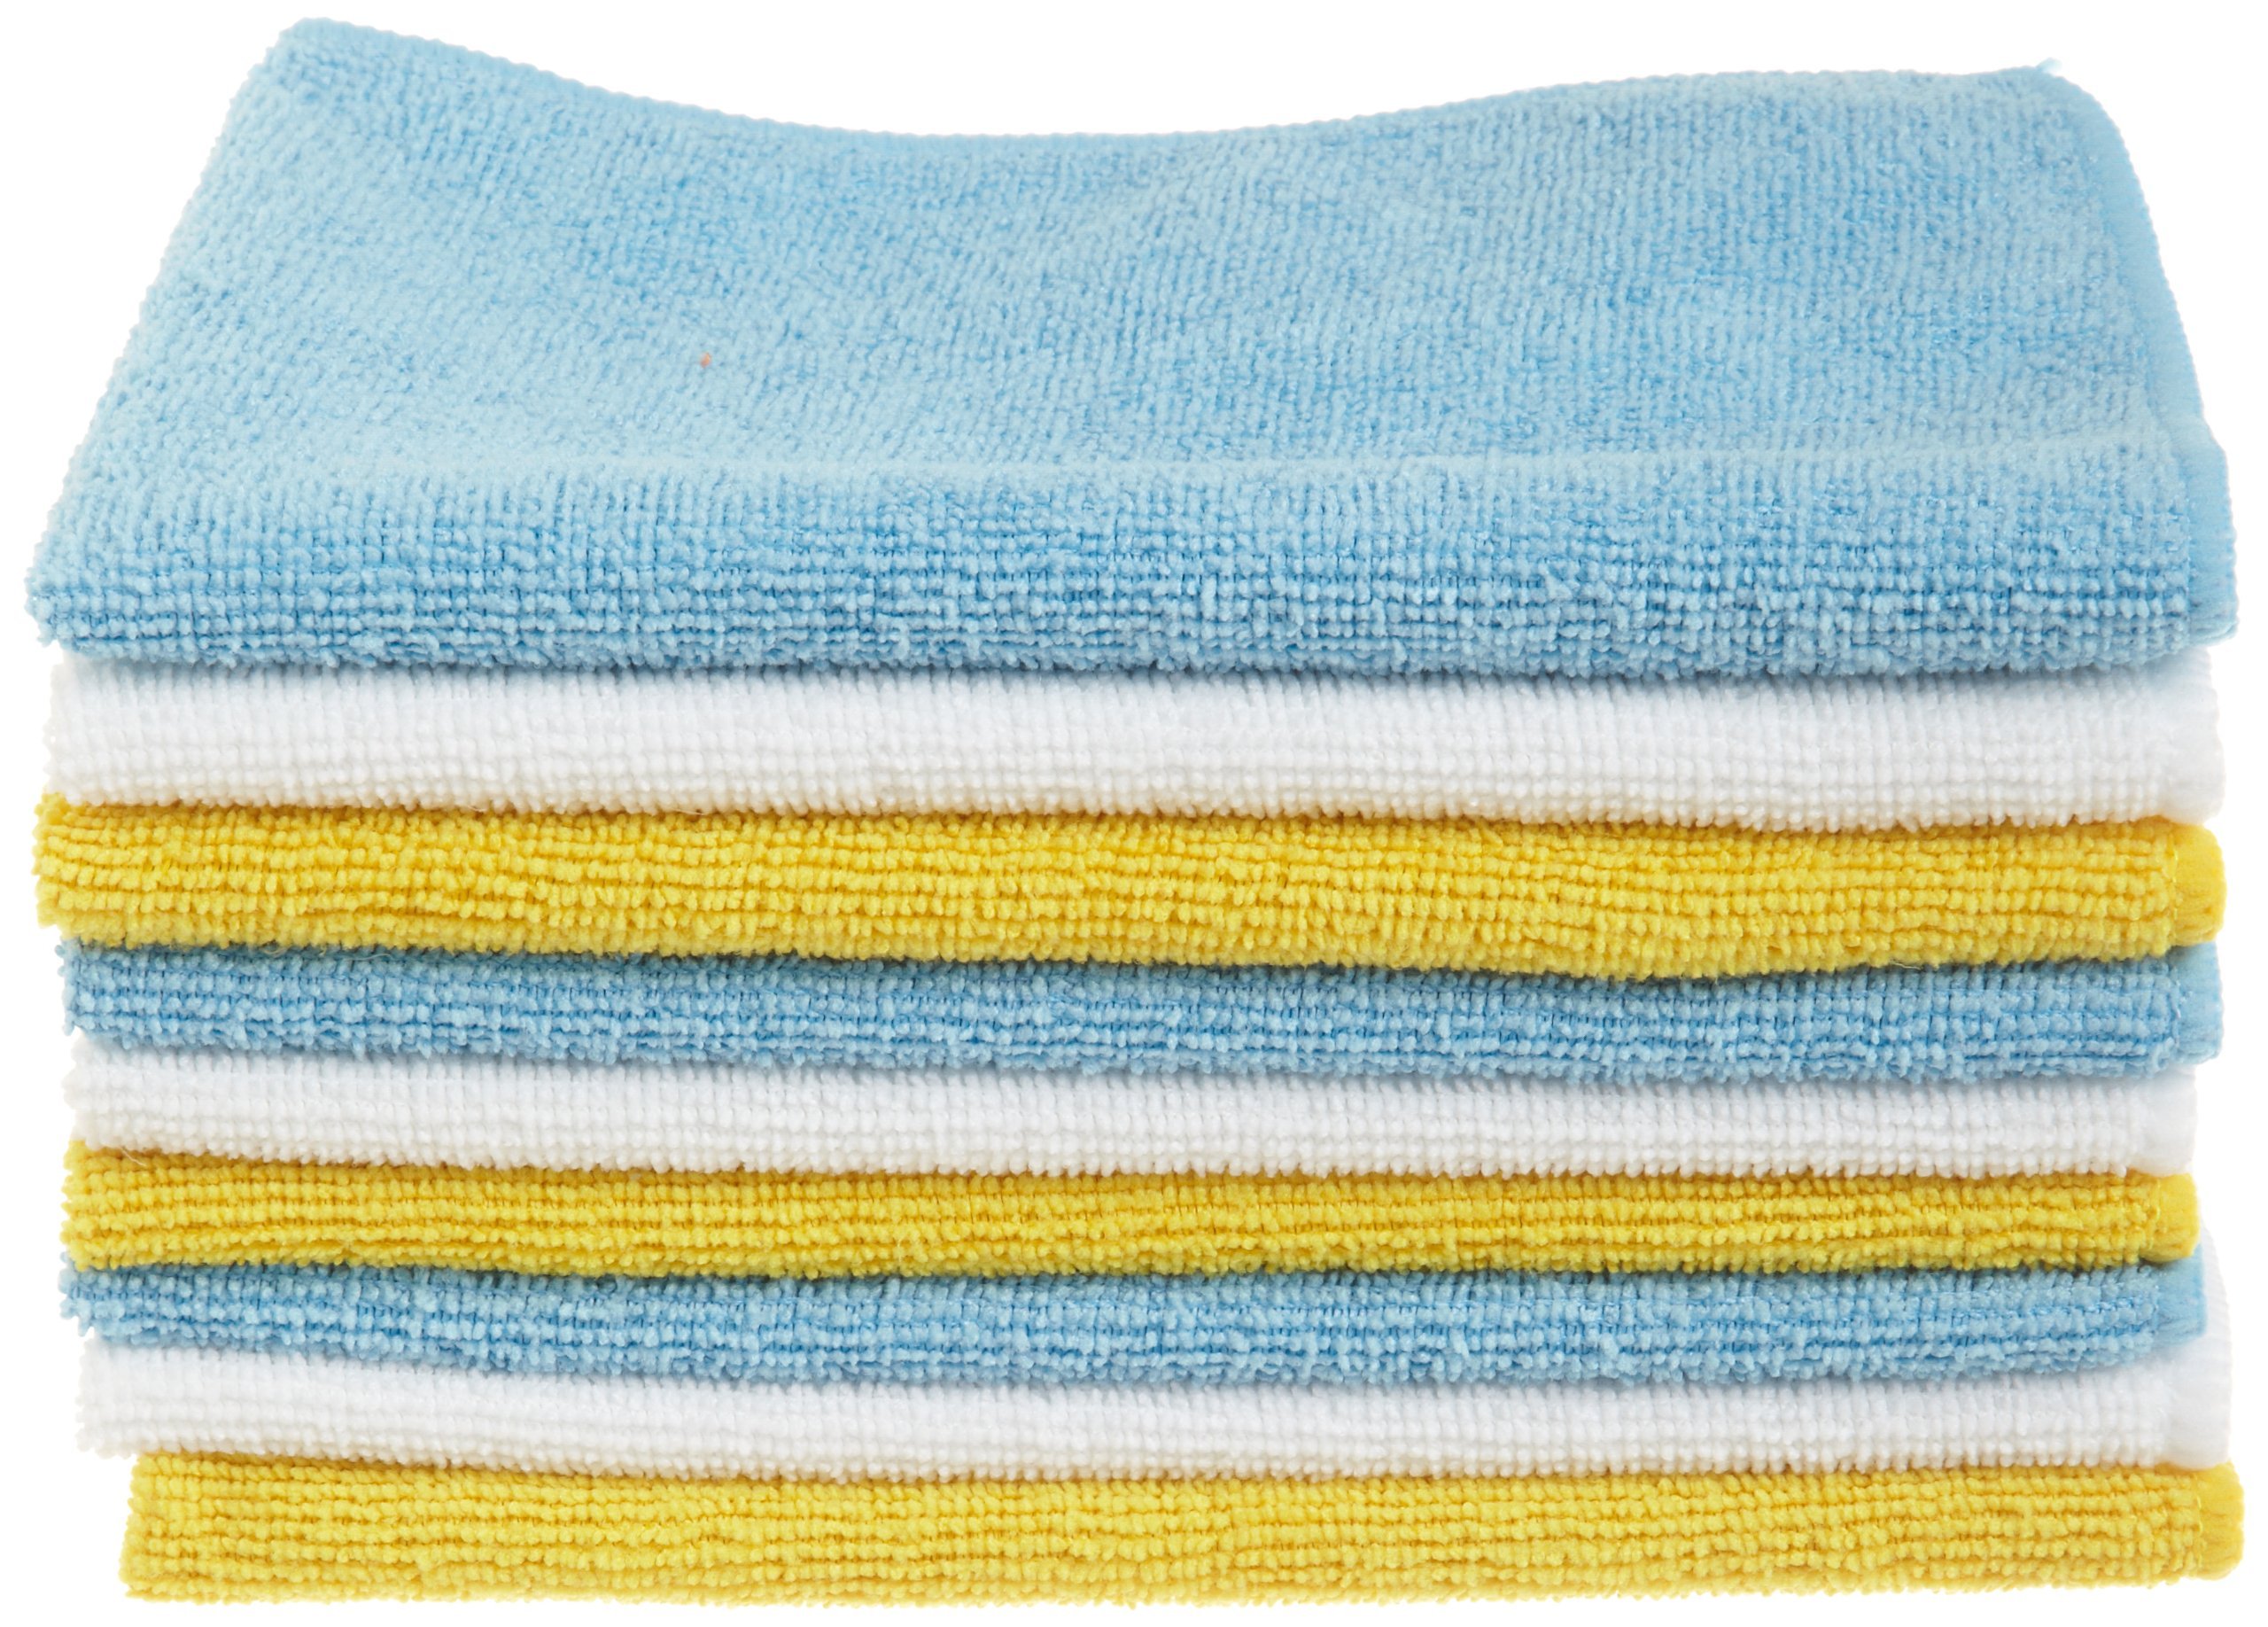 Amazon Basics Microfiber Cleaning Cloth, Non-Abrasive, Reusable and Washable, Pack of 36, Blue/White/Yellow, 16